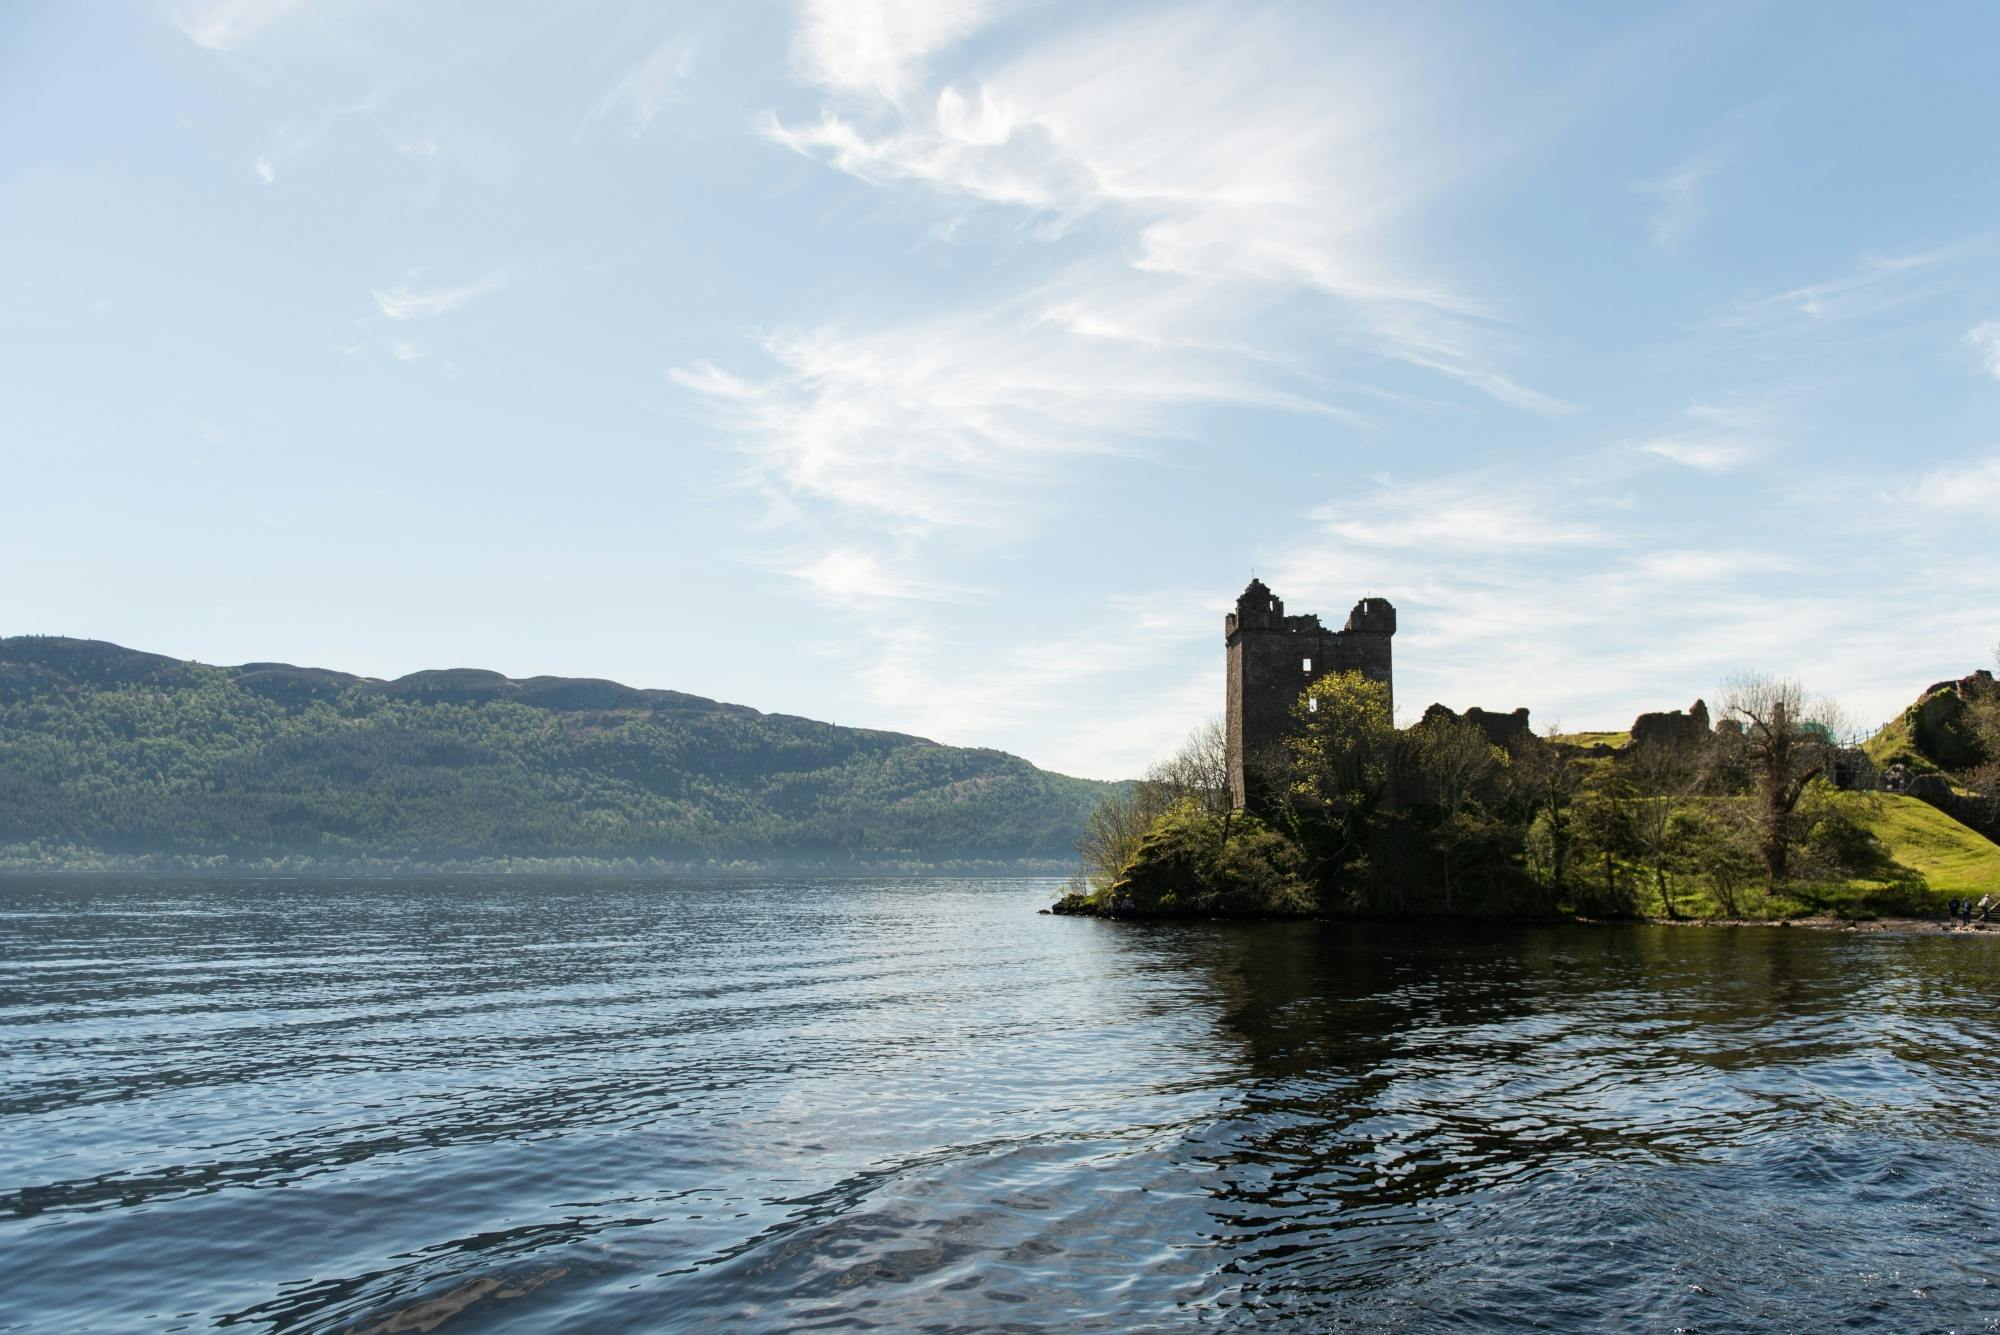 2-day Loch Ness, Inverness and the Highlands tour from Edinburgh